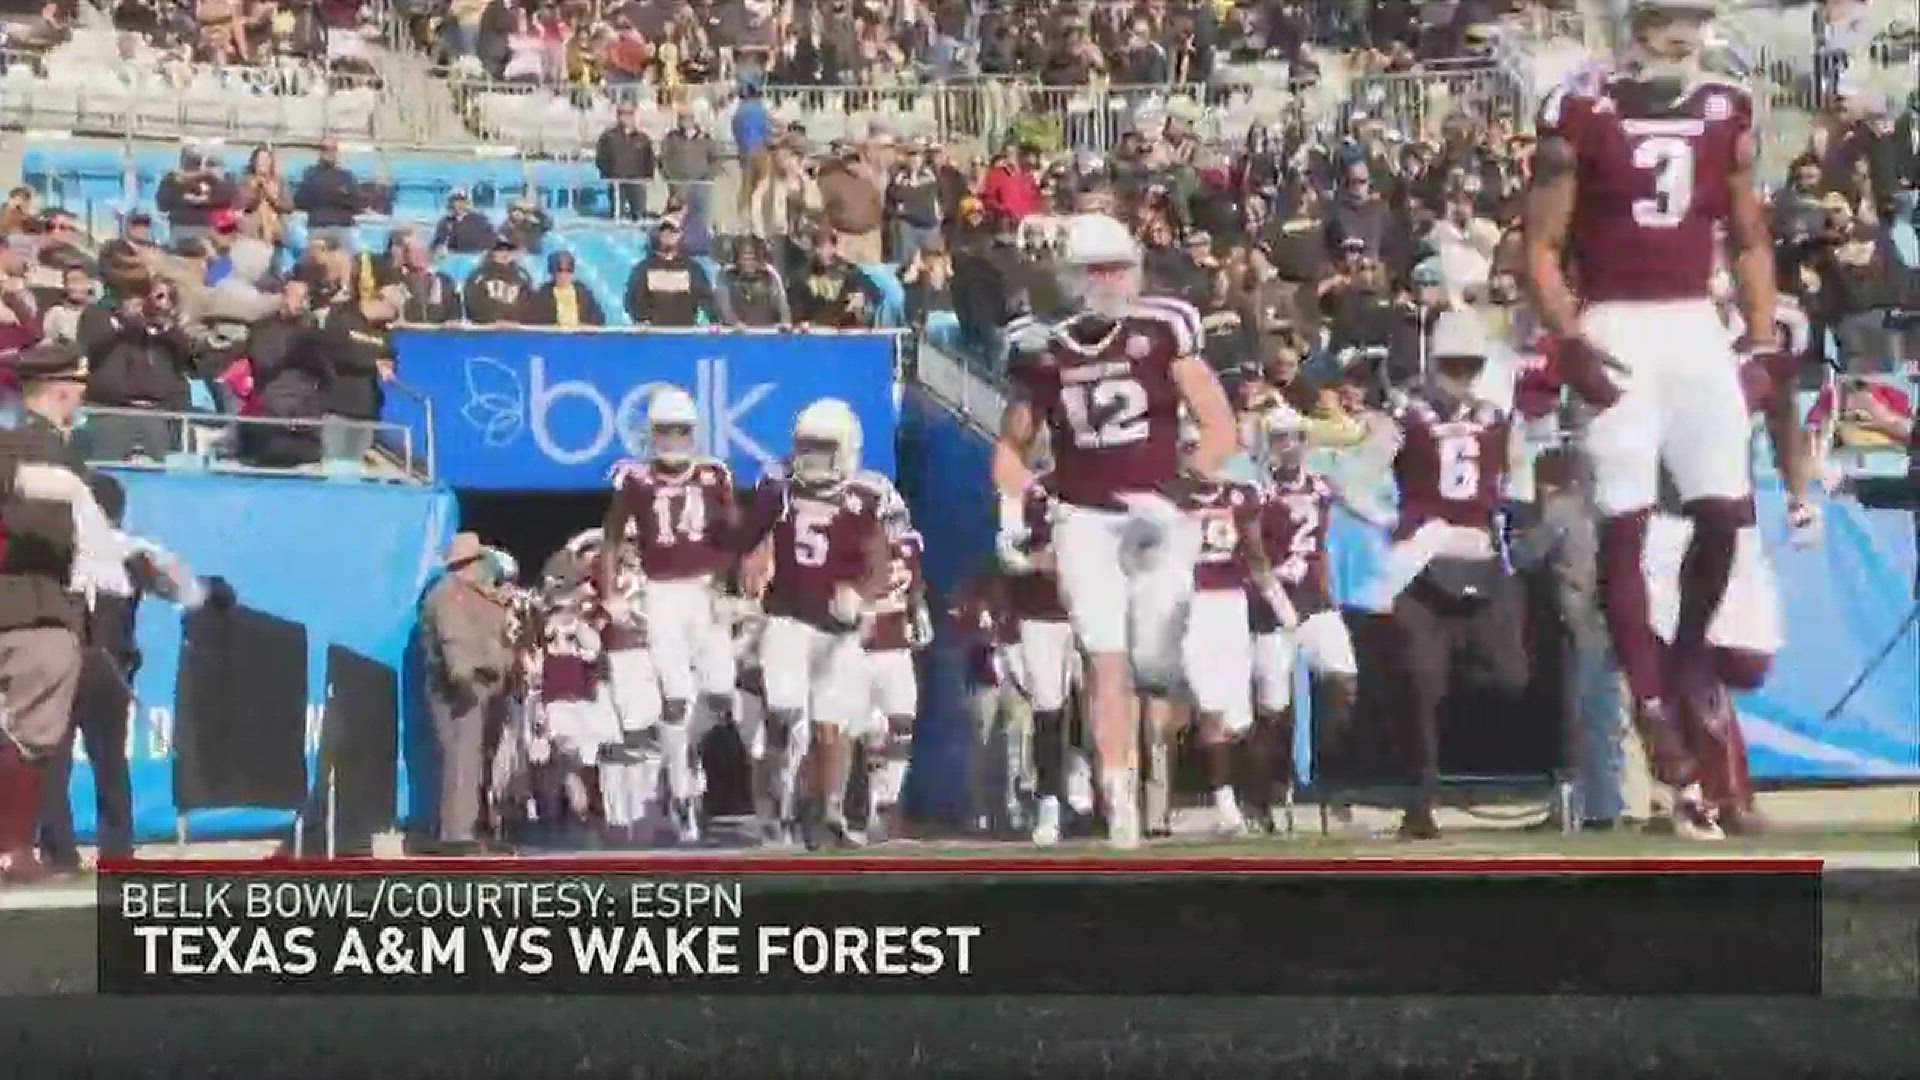 Wake Forest defeated Texas A&M 55-52 in the Belk Bowl on Friday.